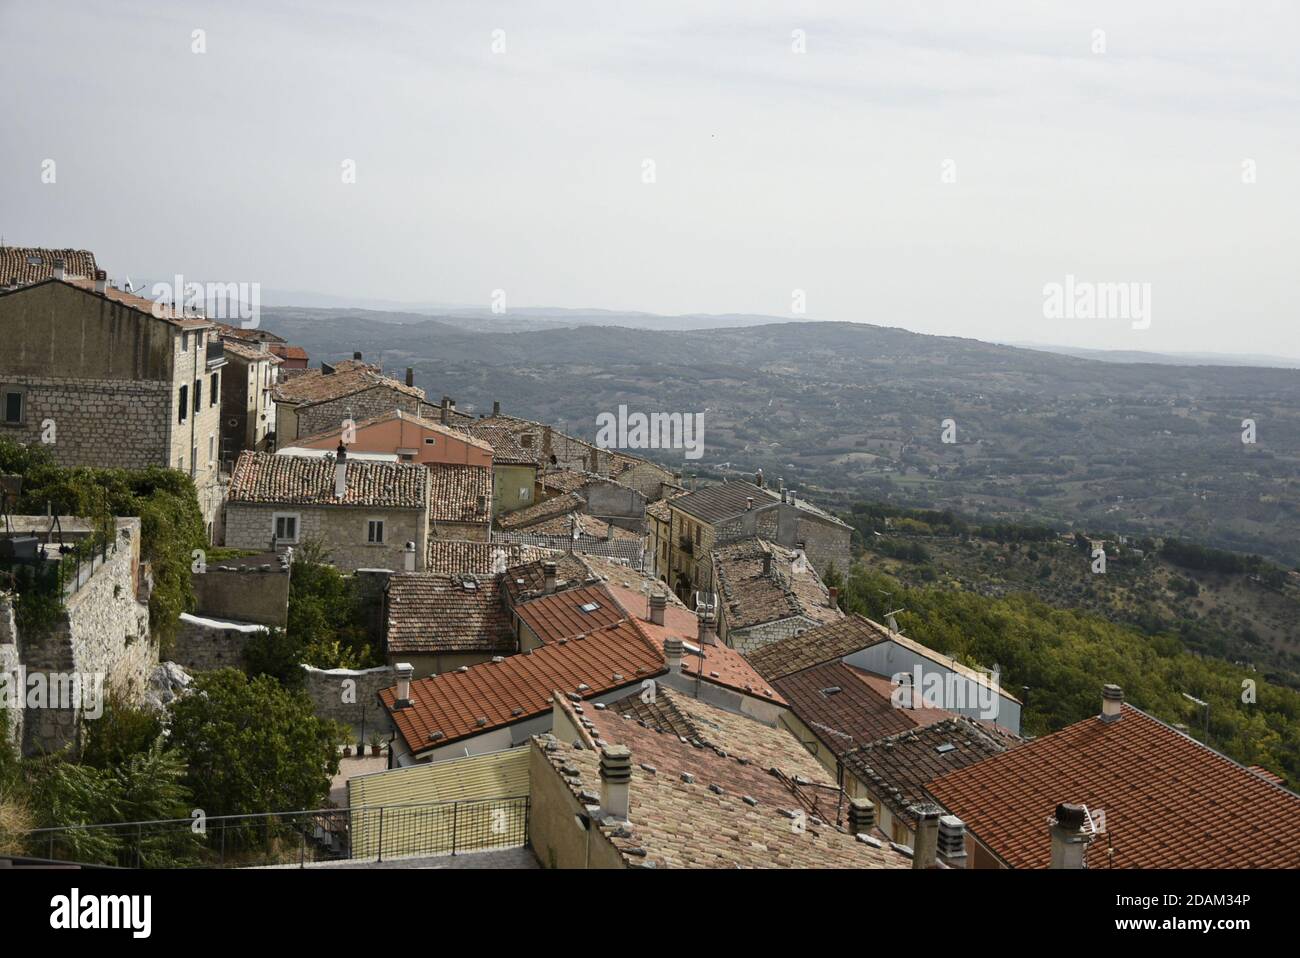 Panoramic view of Ferrazzano, a village in the mountains of the Molise region, Italy. Stock Photo